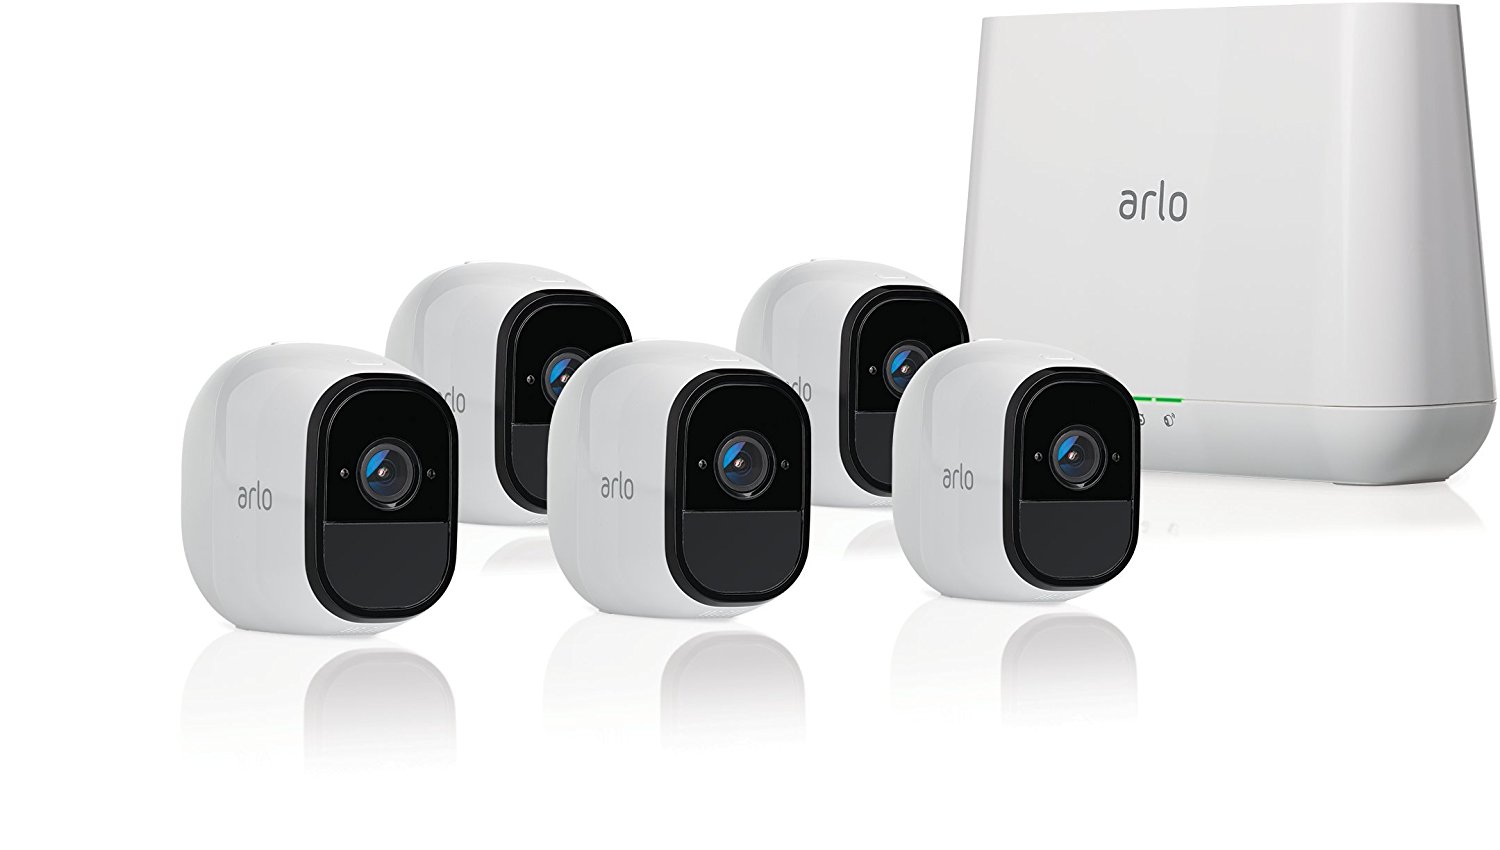 Arlo Pro Security System